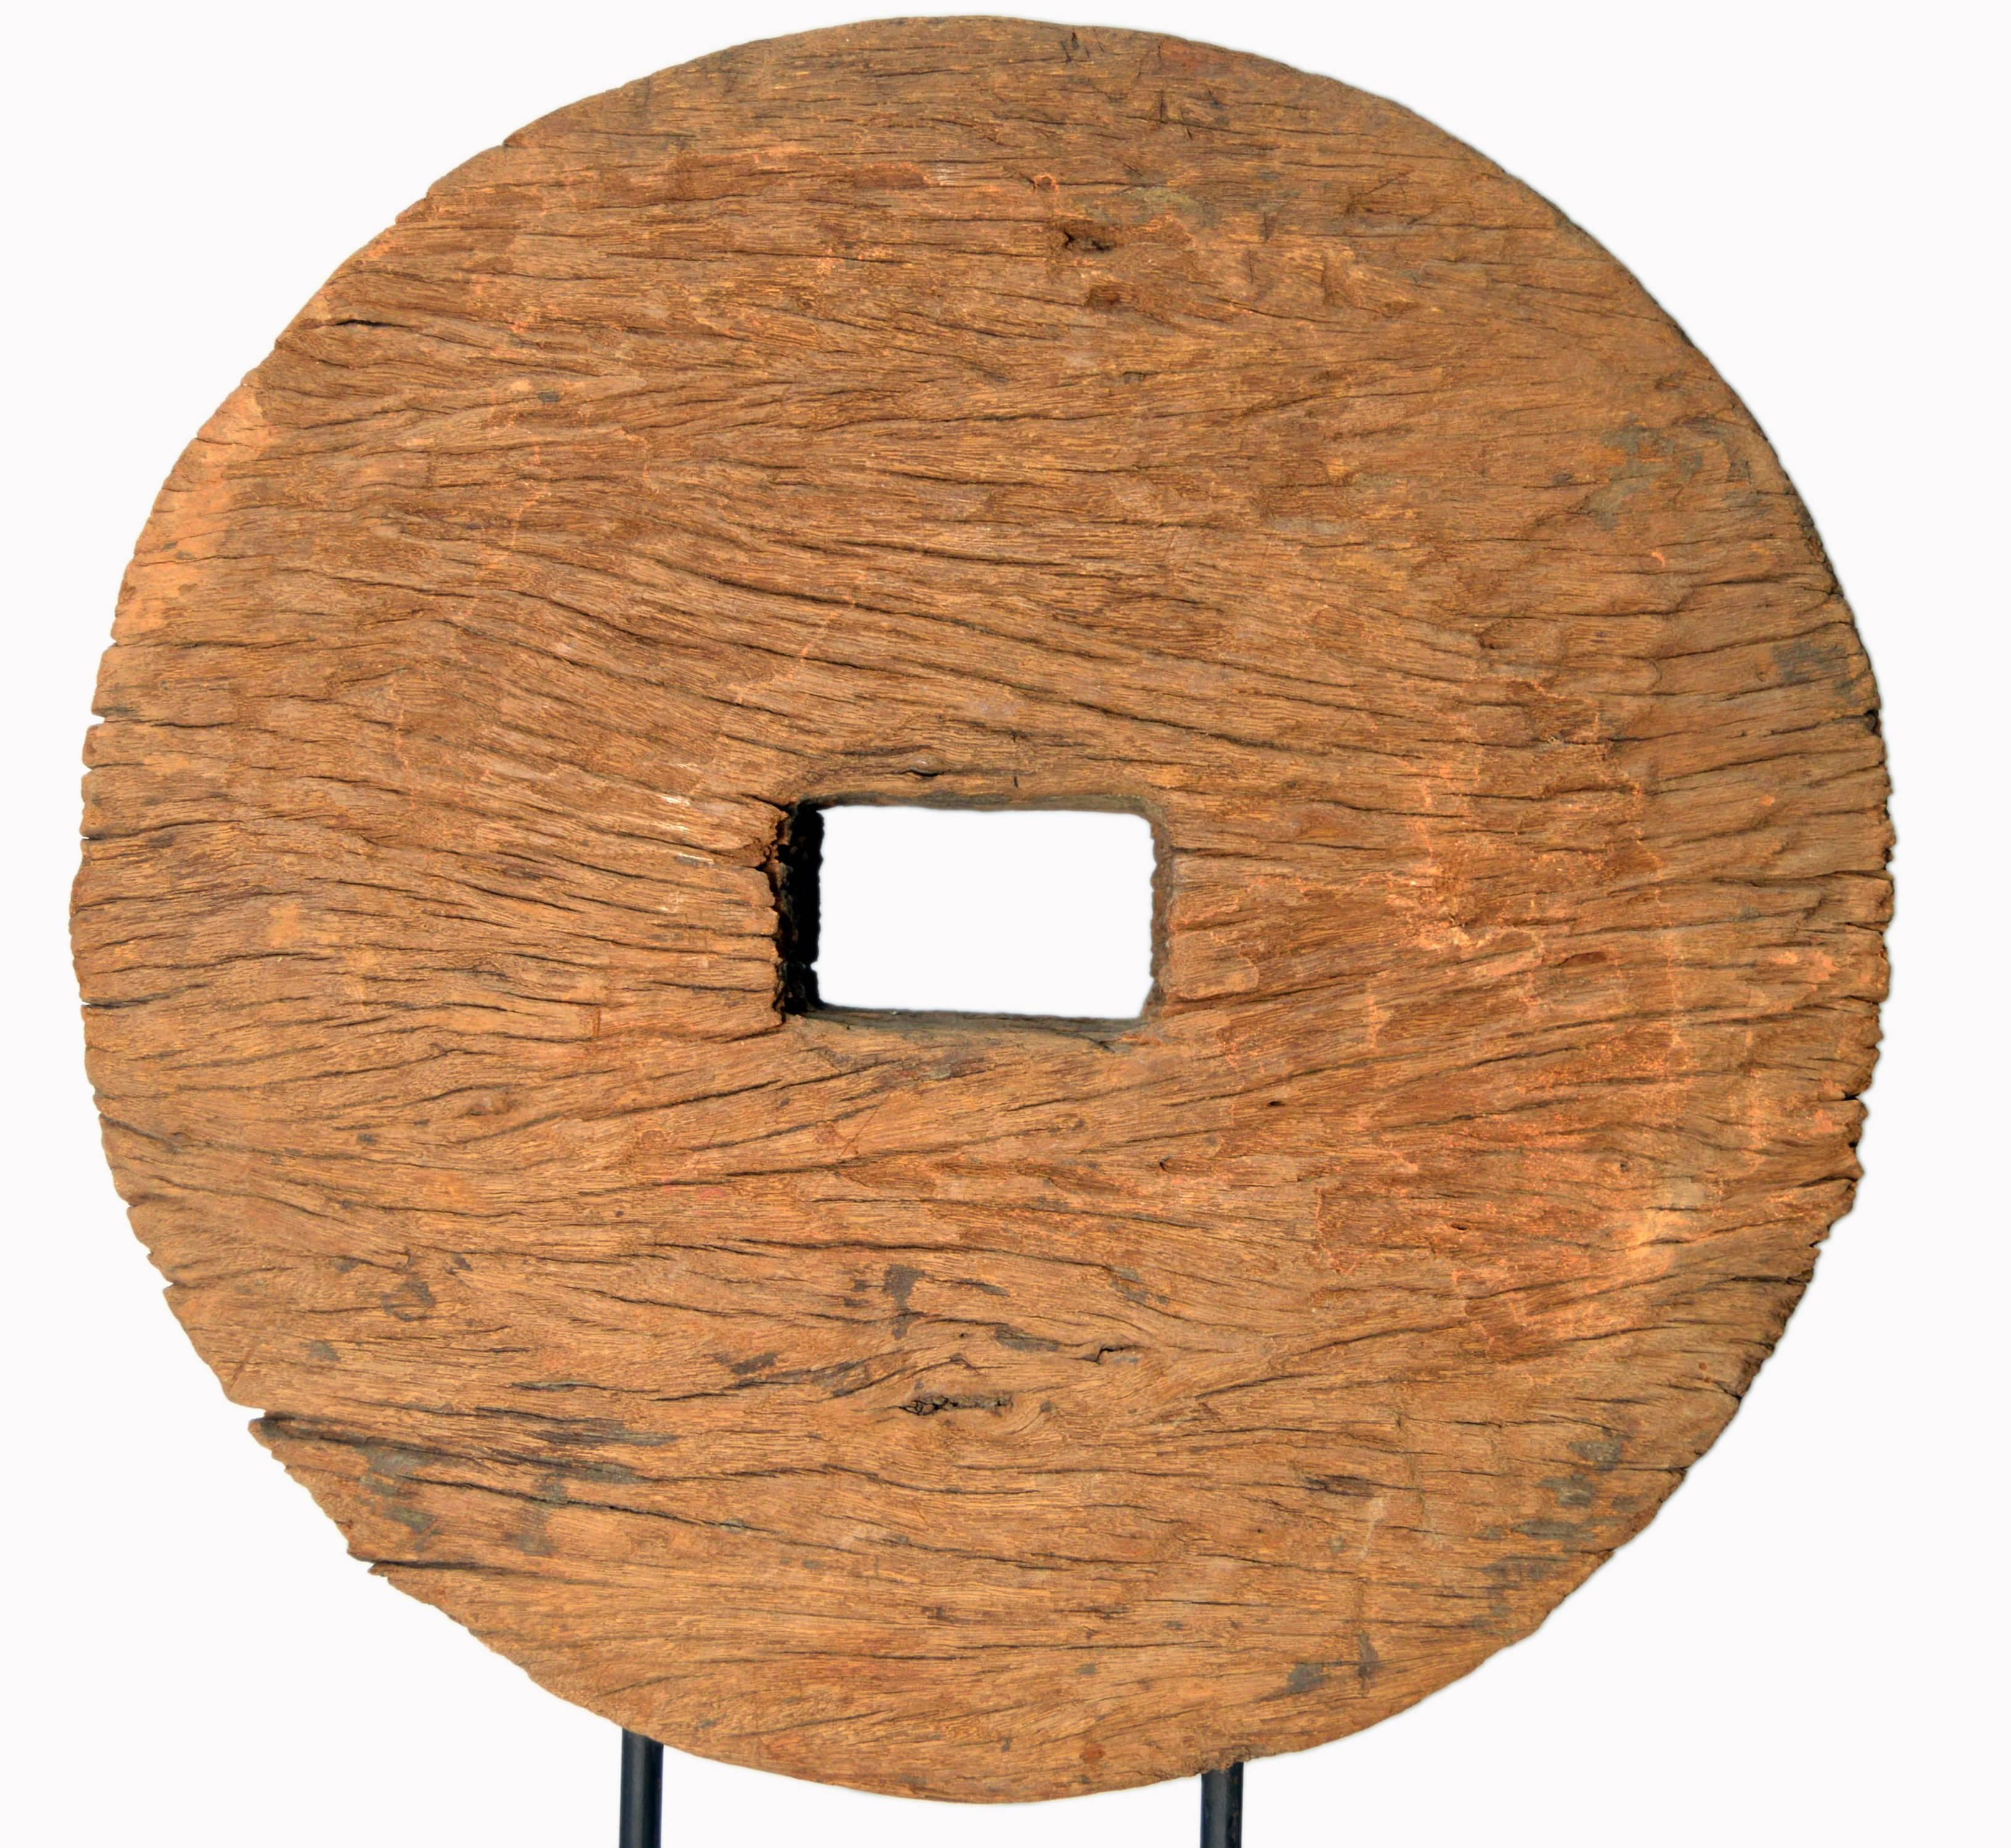 A Chinese 19th century rustic ox cart wooden wheel mounted on a custom made black stand. This handmade Chinese wheel is pierced in its center with a rectangular hole reserved for the axle tree. The wheel showcases a great weathered patina witnessing